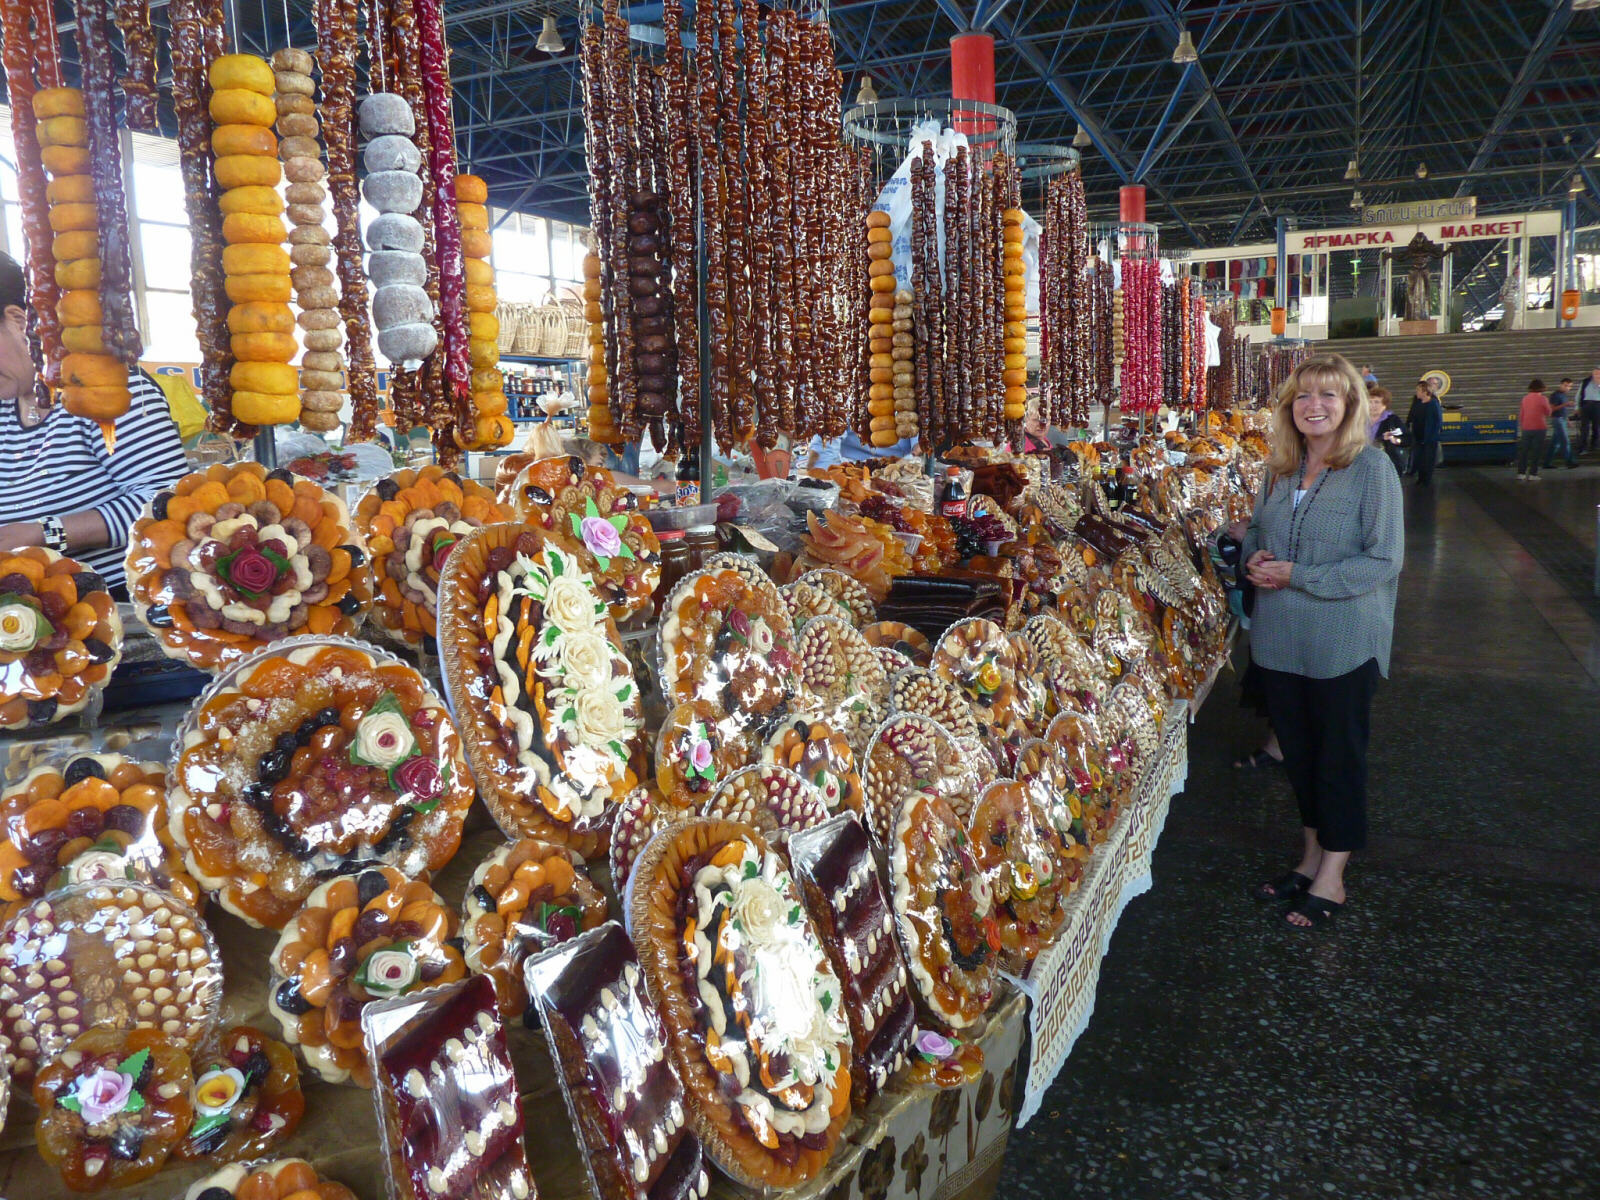 A dried fruit stall in the market in Yerevan, Armenia